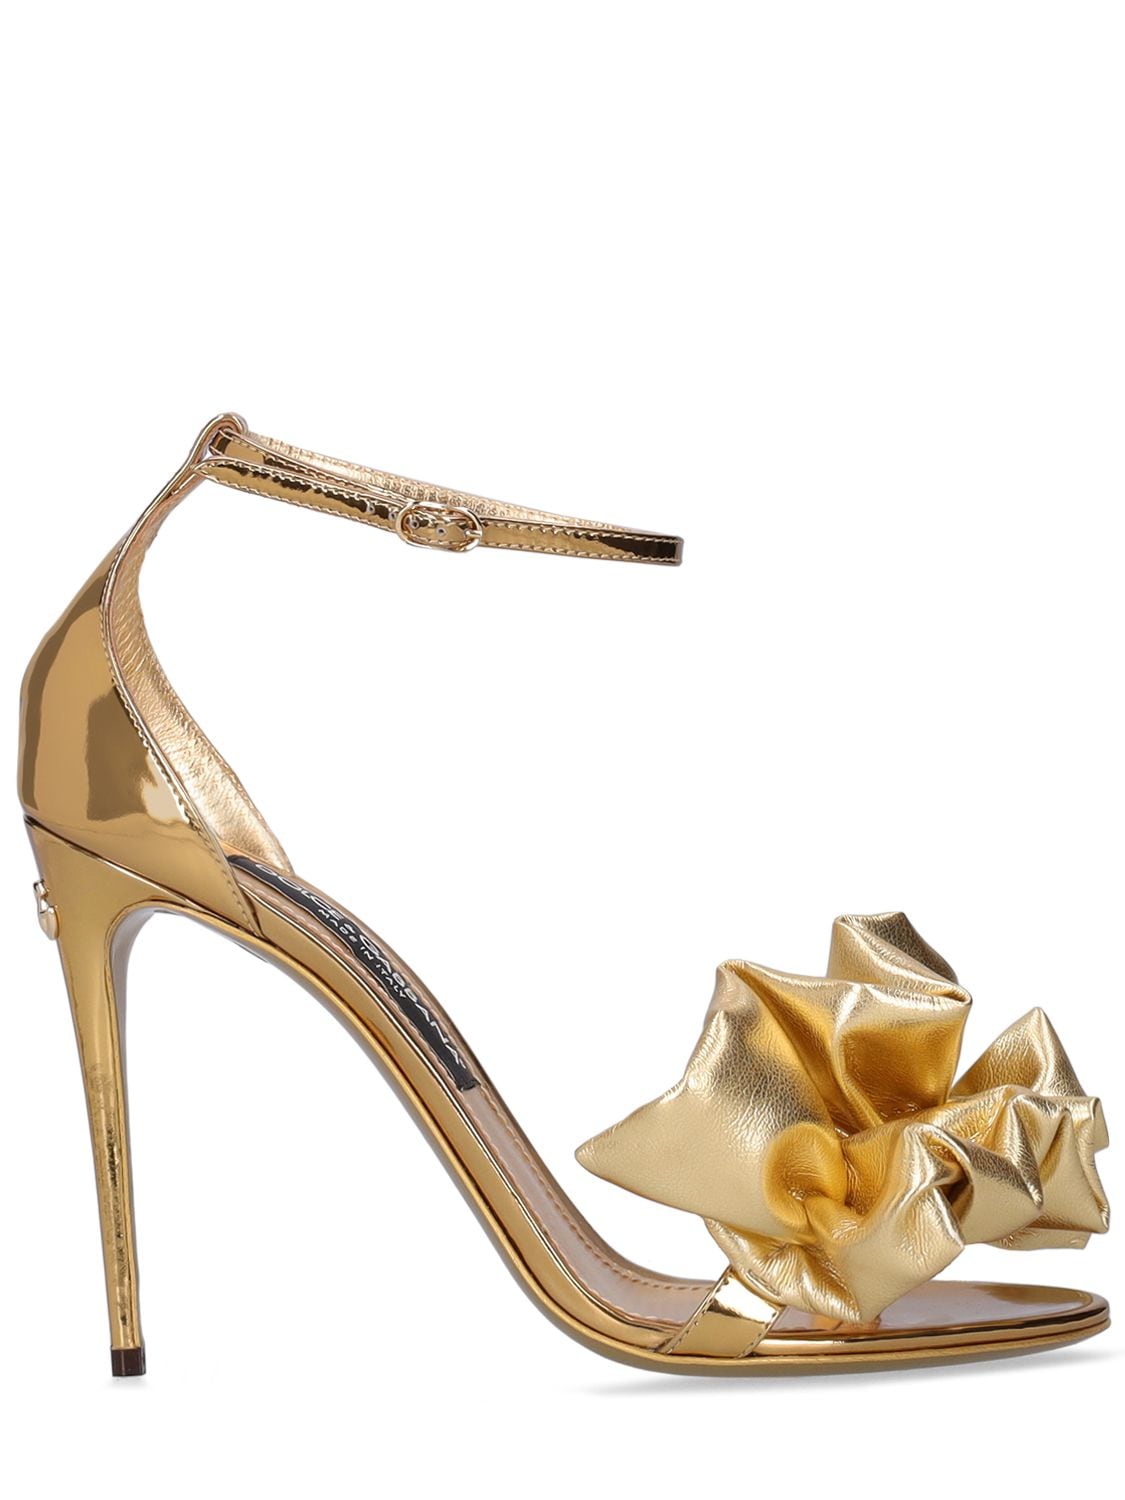 DOLCE & GABBANA 105MM LAMINATED LEATHER SANDALS